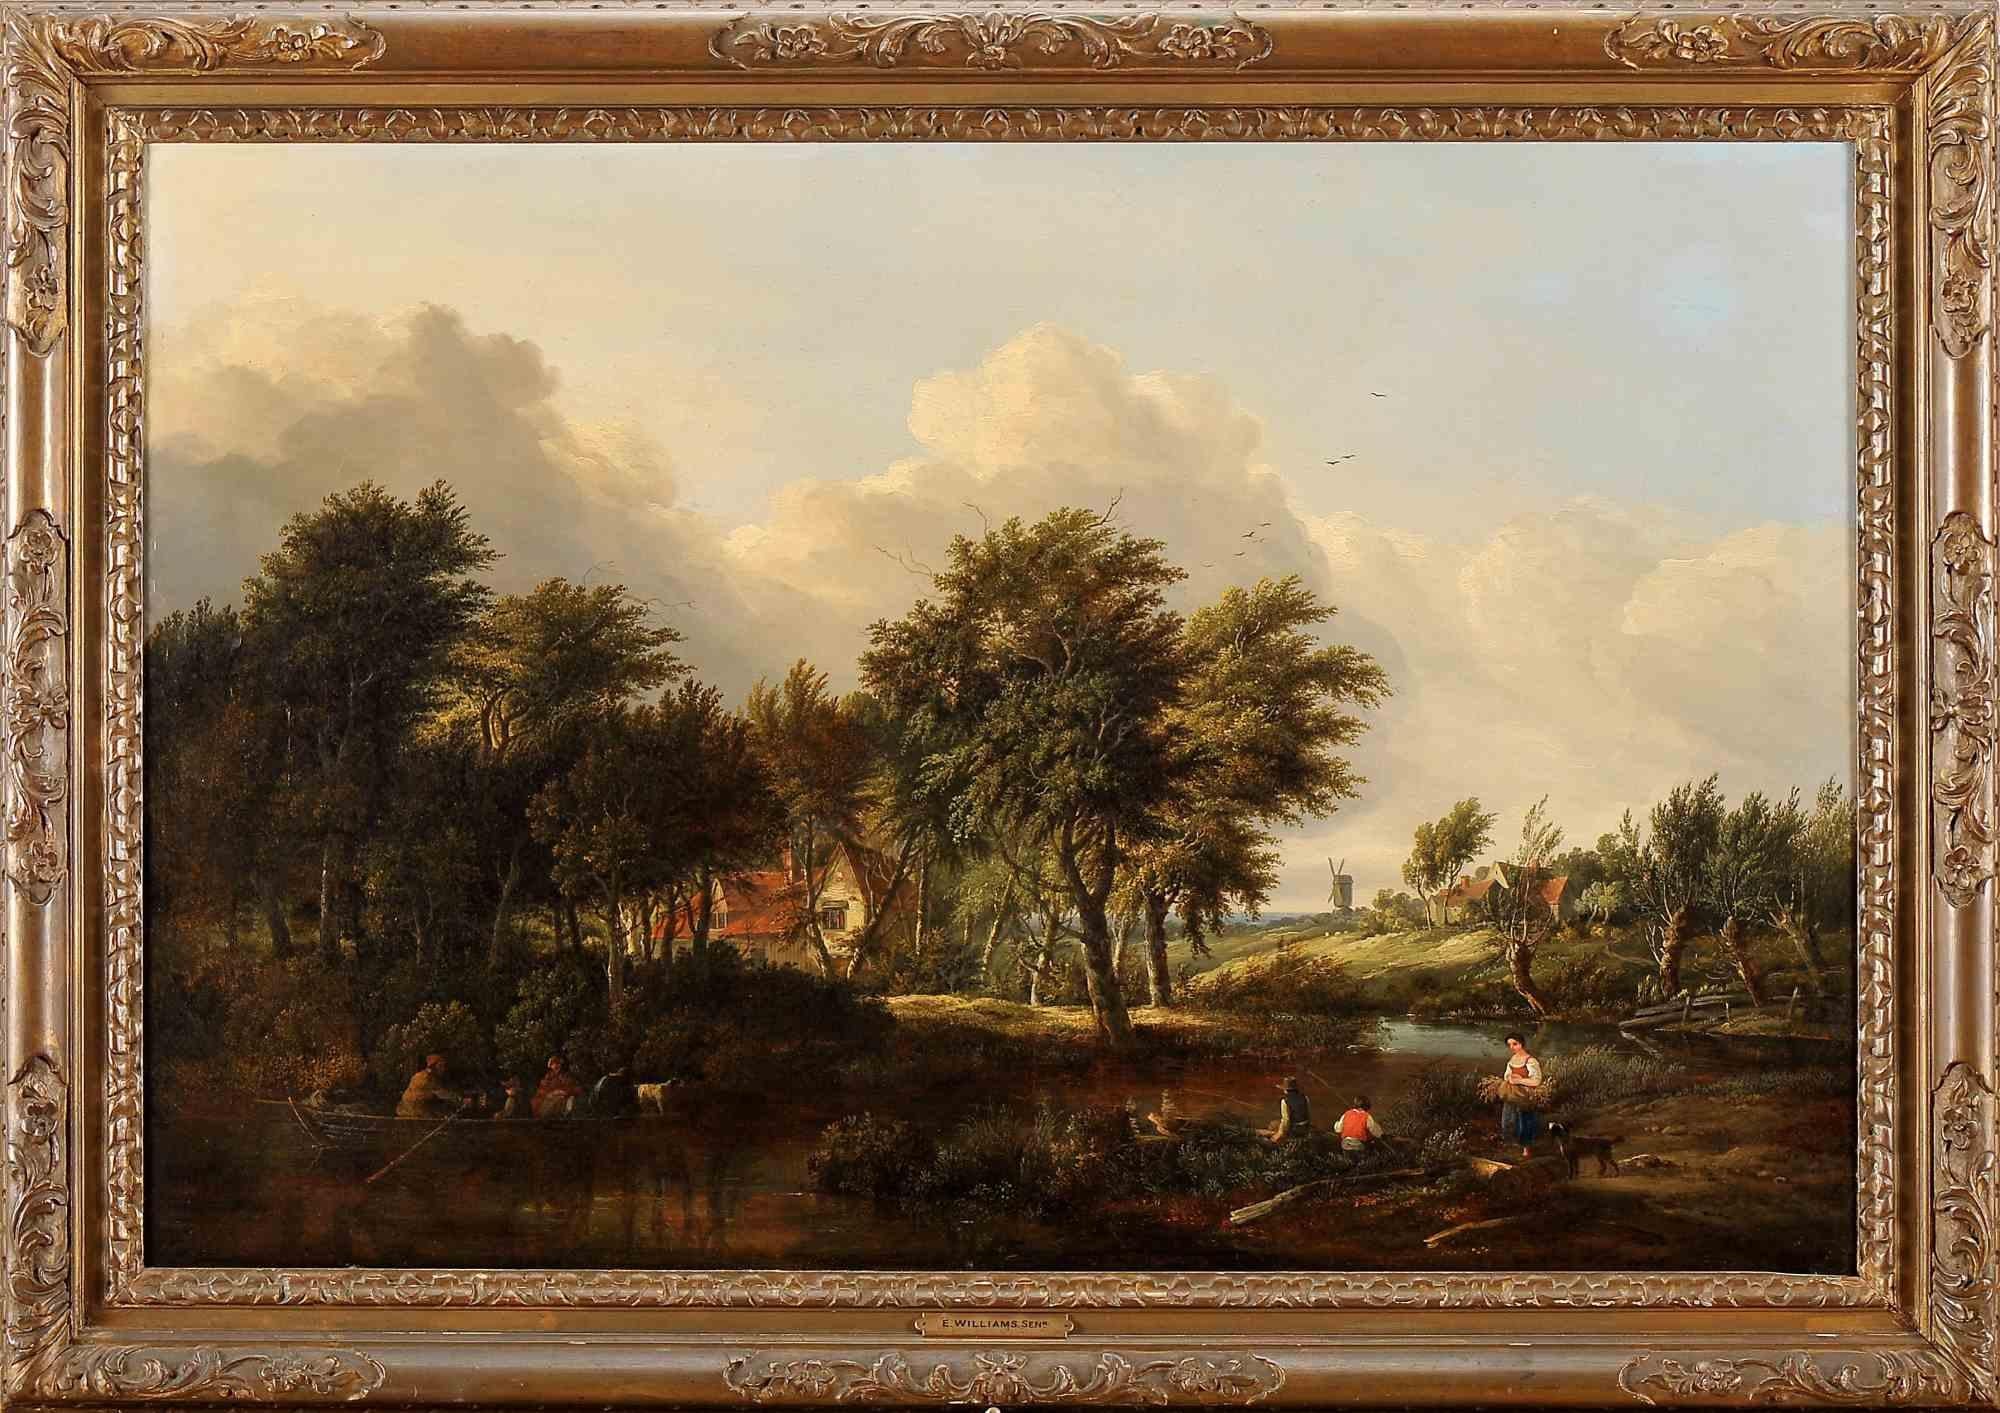 Landscape with Stream - Oil on Canvas - 18th Century - Painting by Unknown